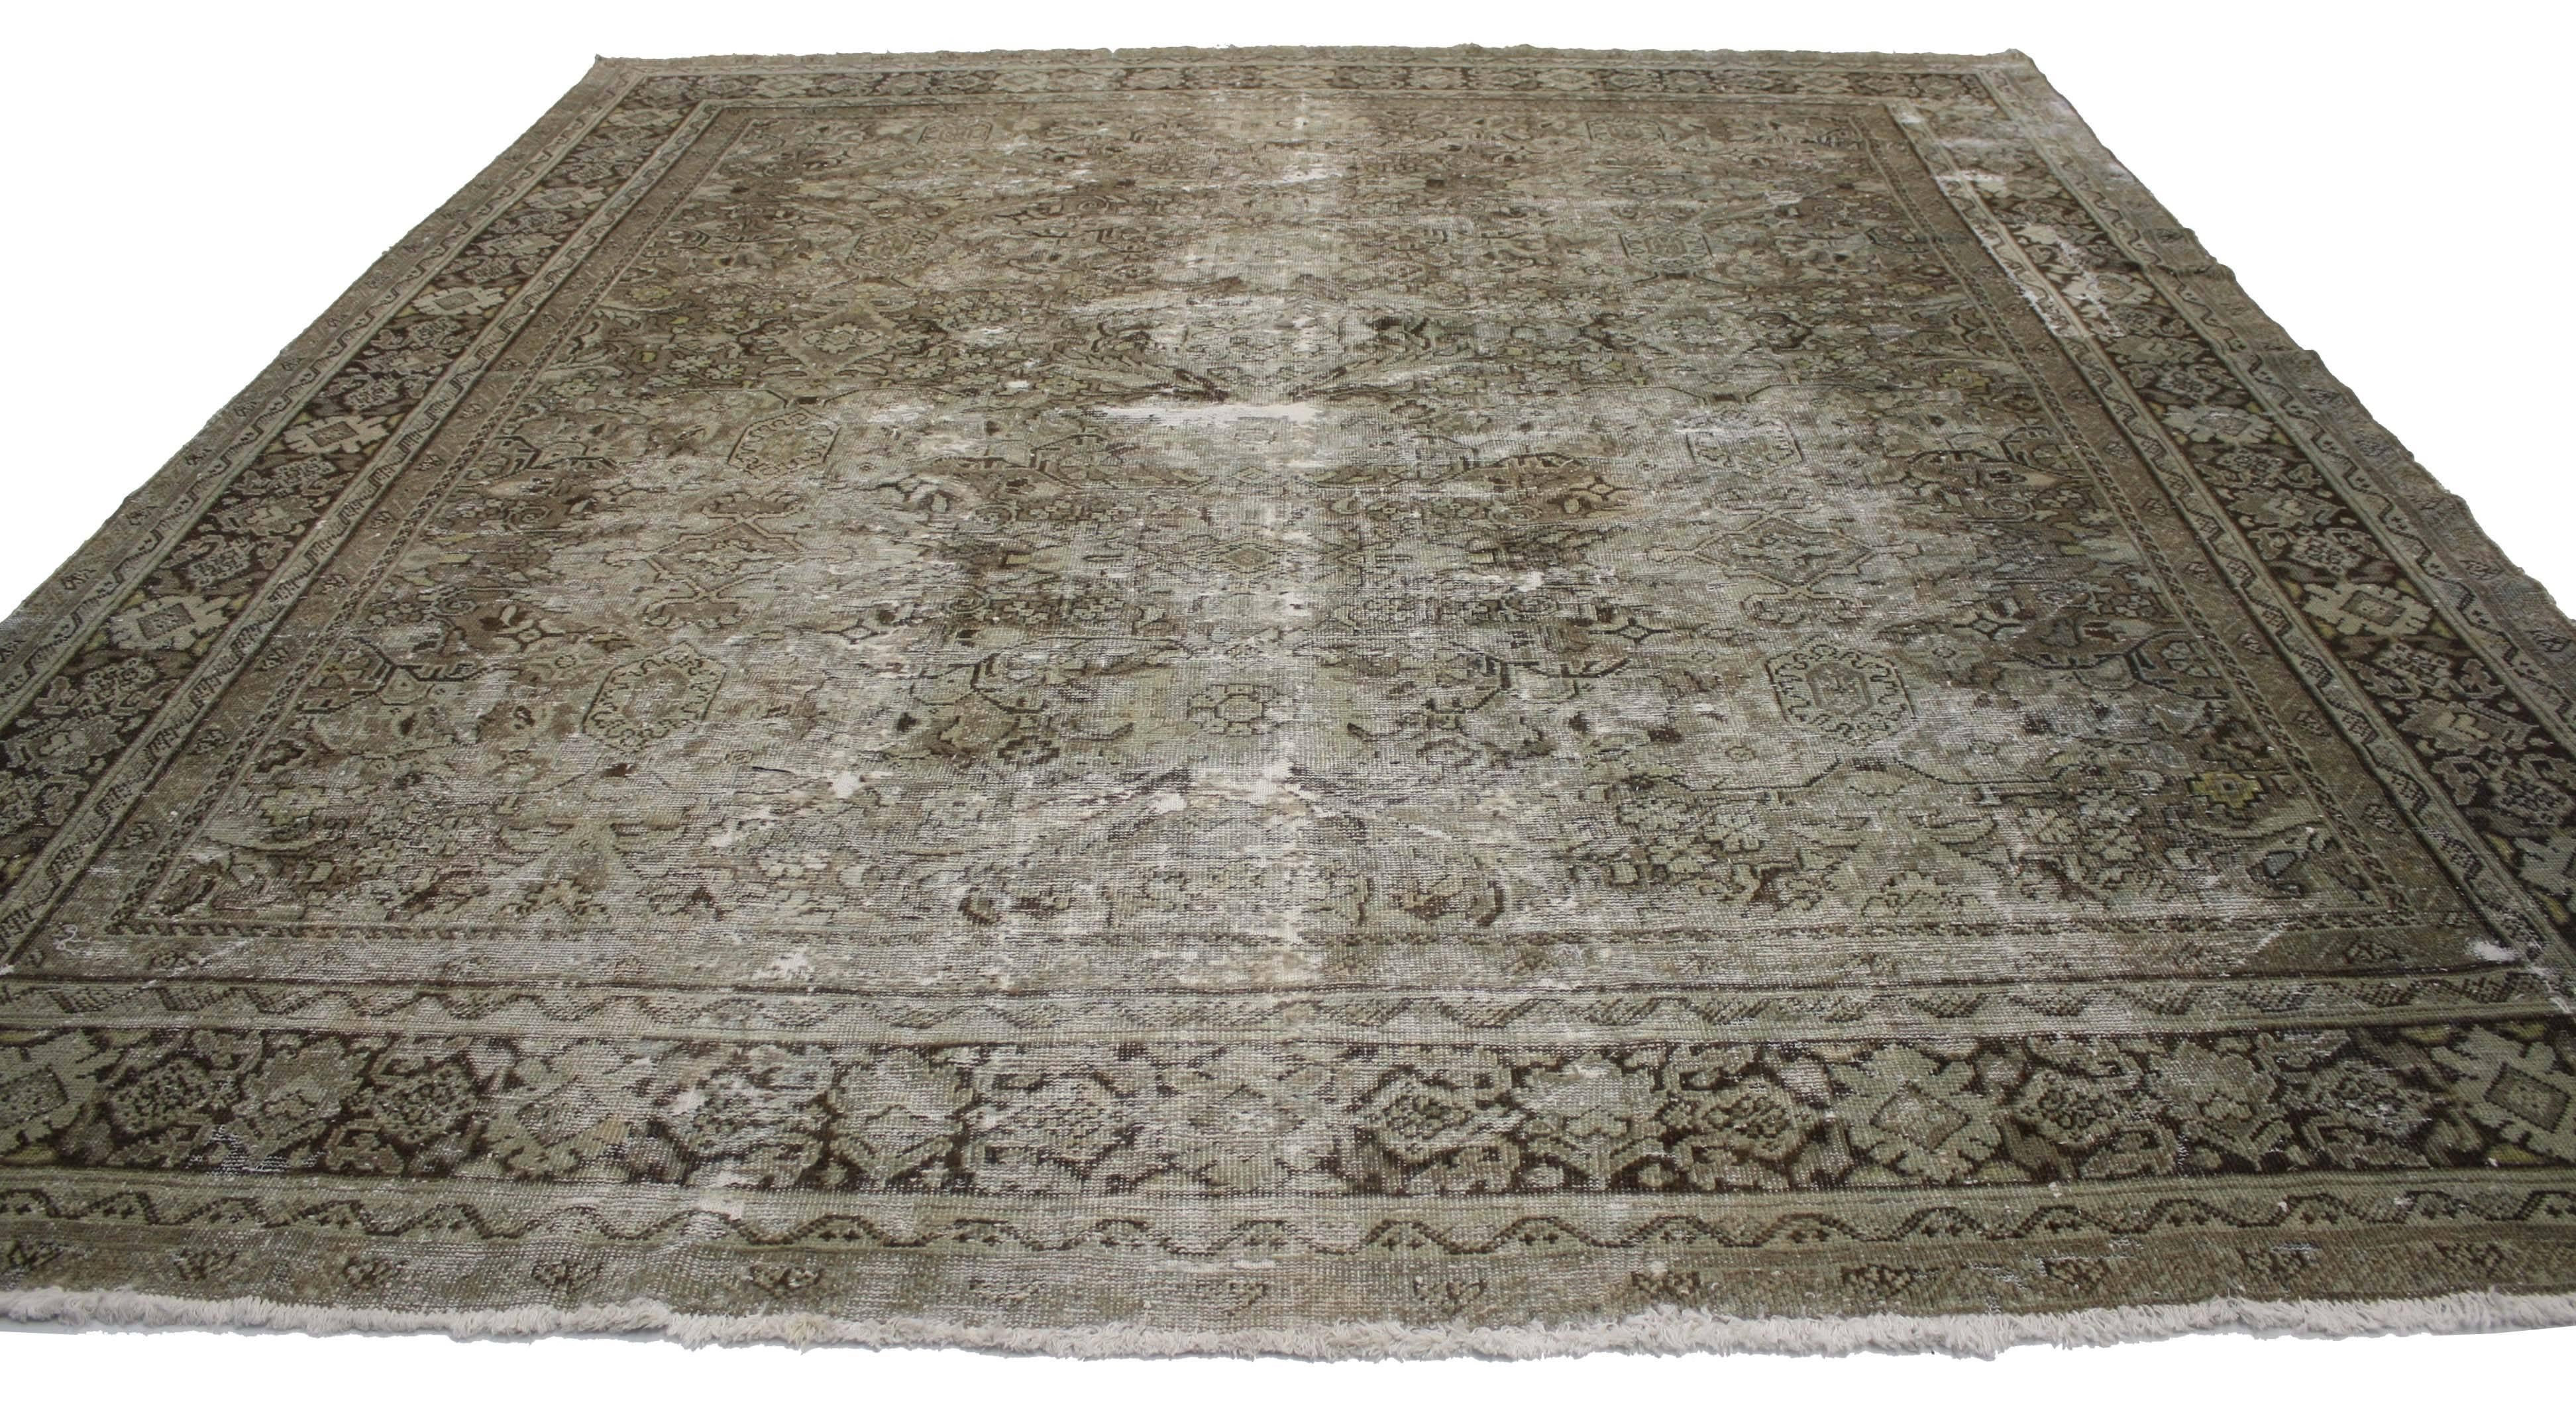 Antique-Worn Persian Mahal Rug, Relaxed Refinement Meets Earth-Tone Elegance 2